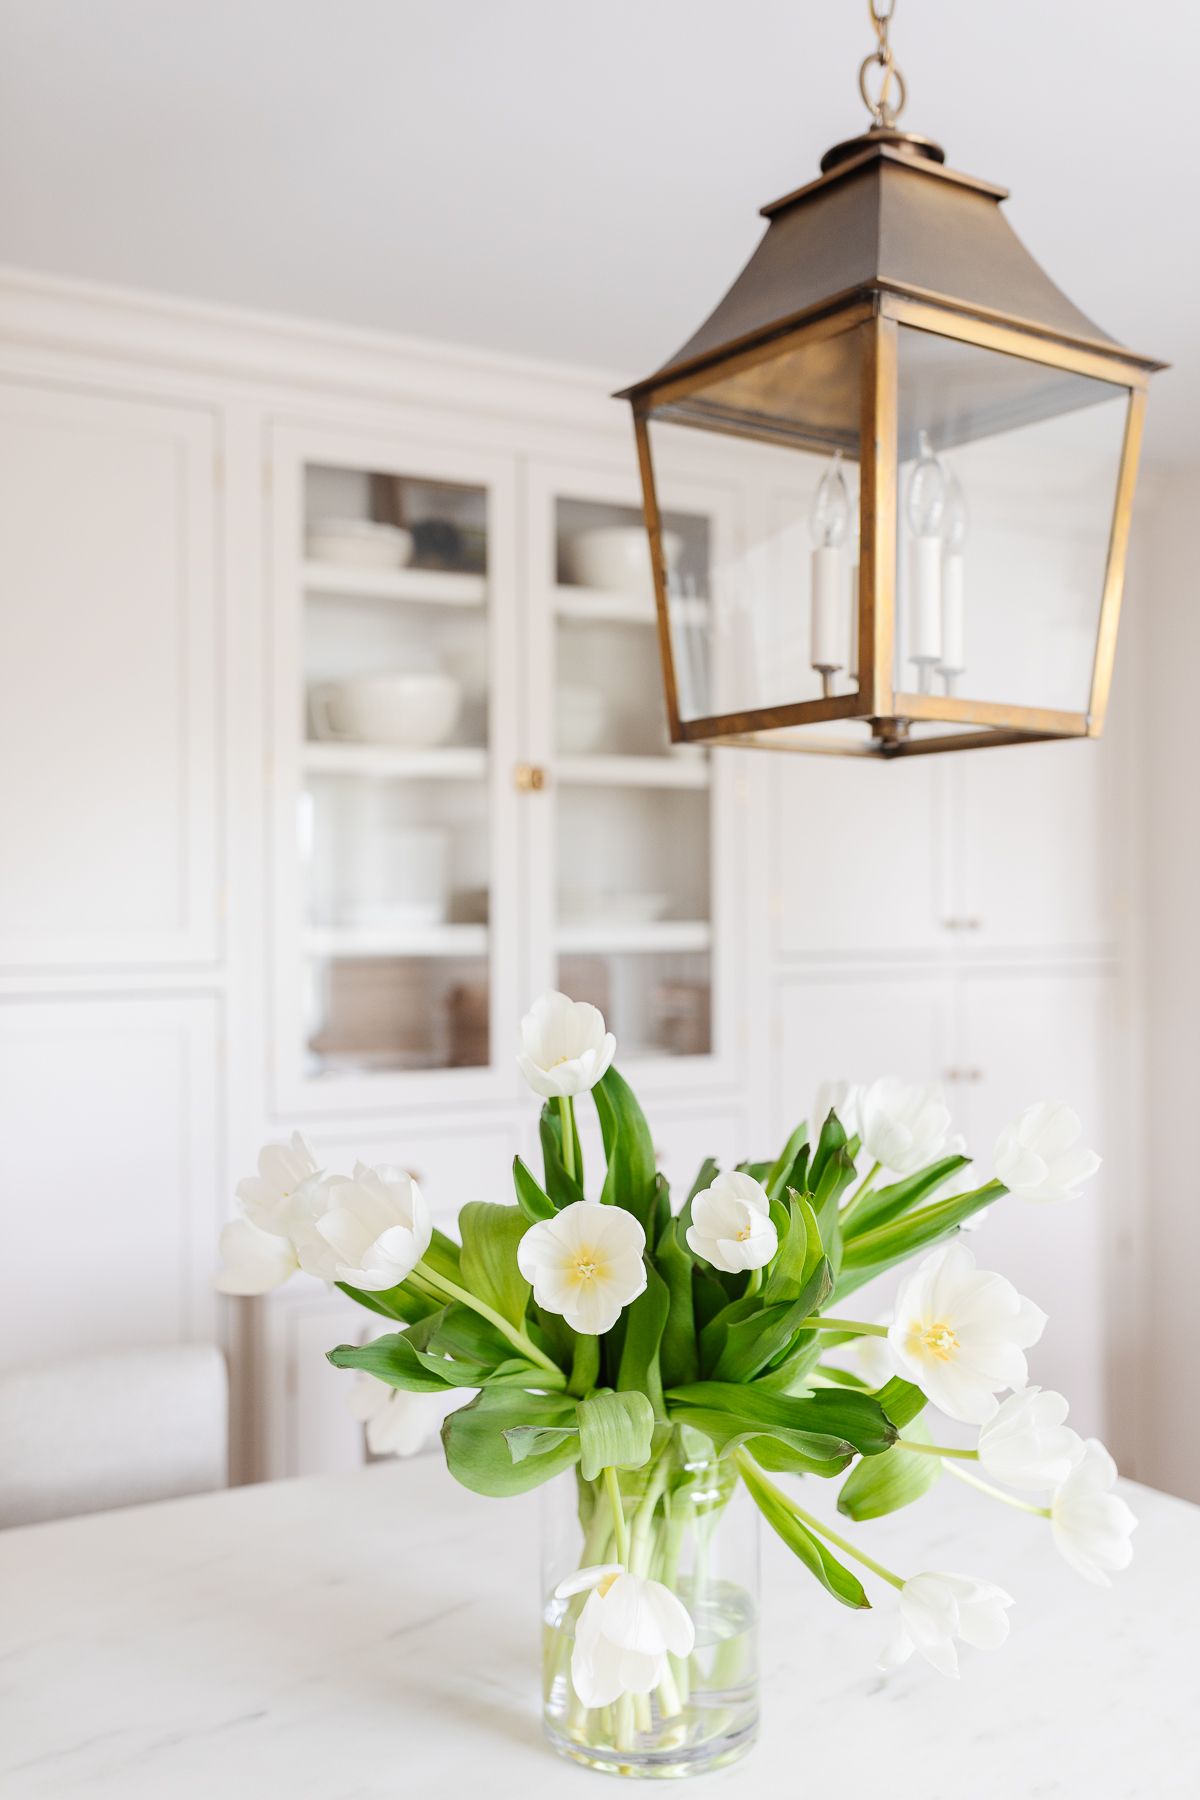 A brass pendant lantern hanging over a vase of white tulips on a kitchen island.